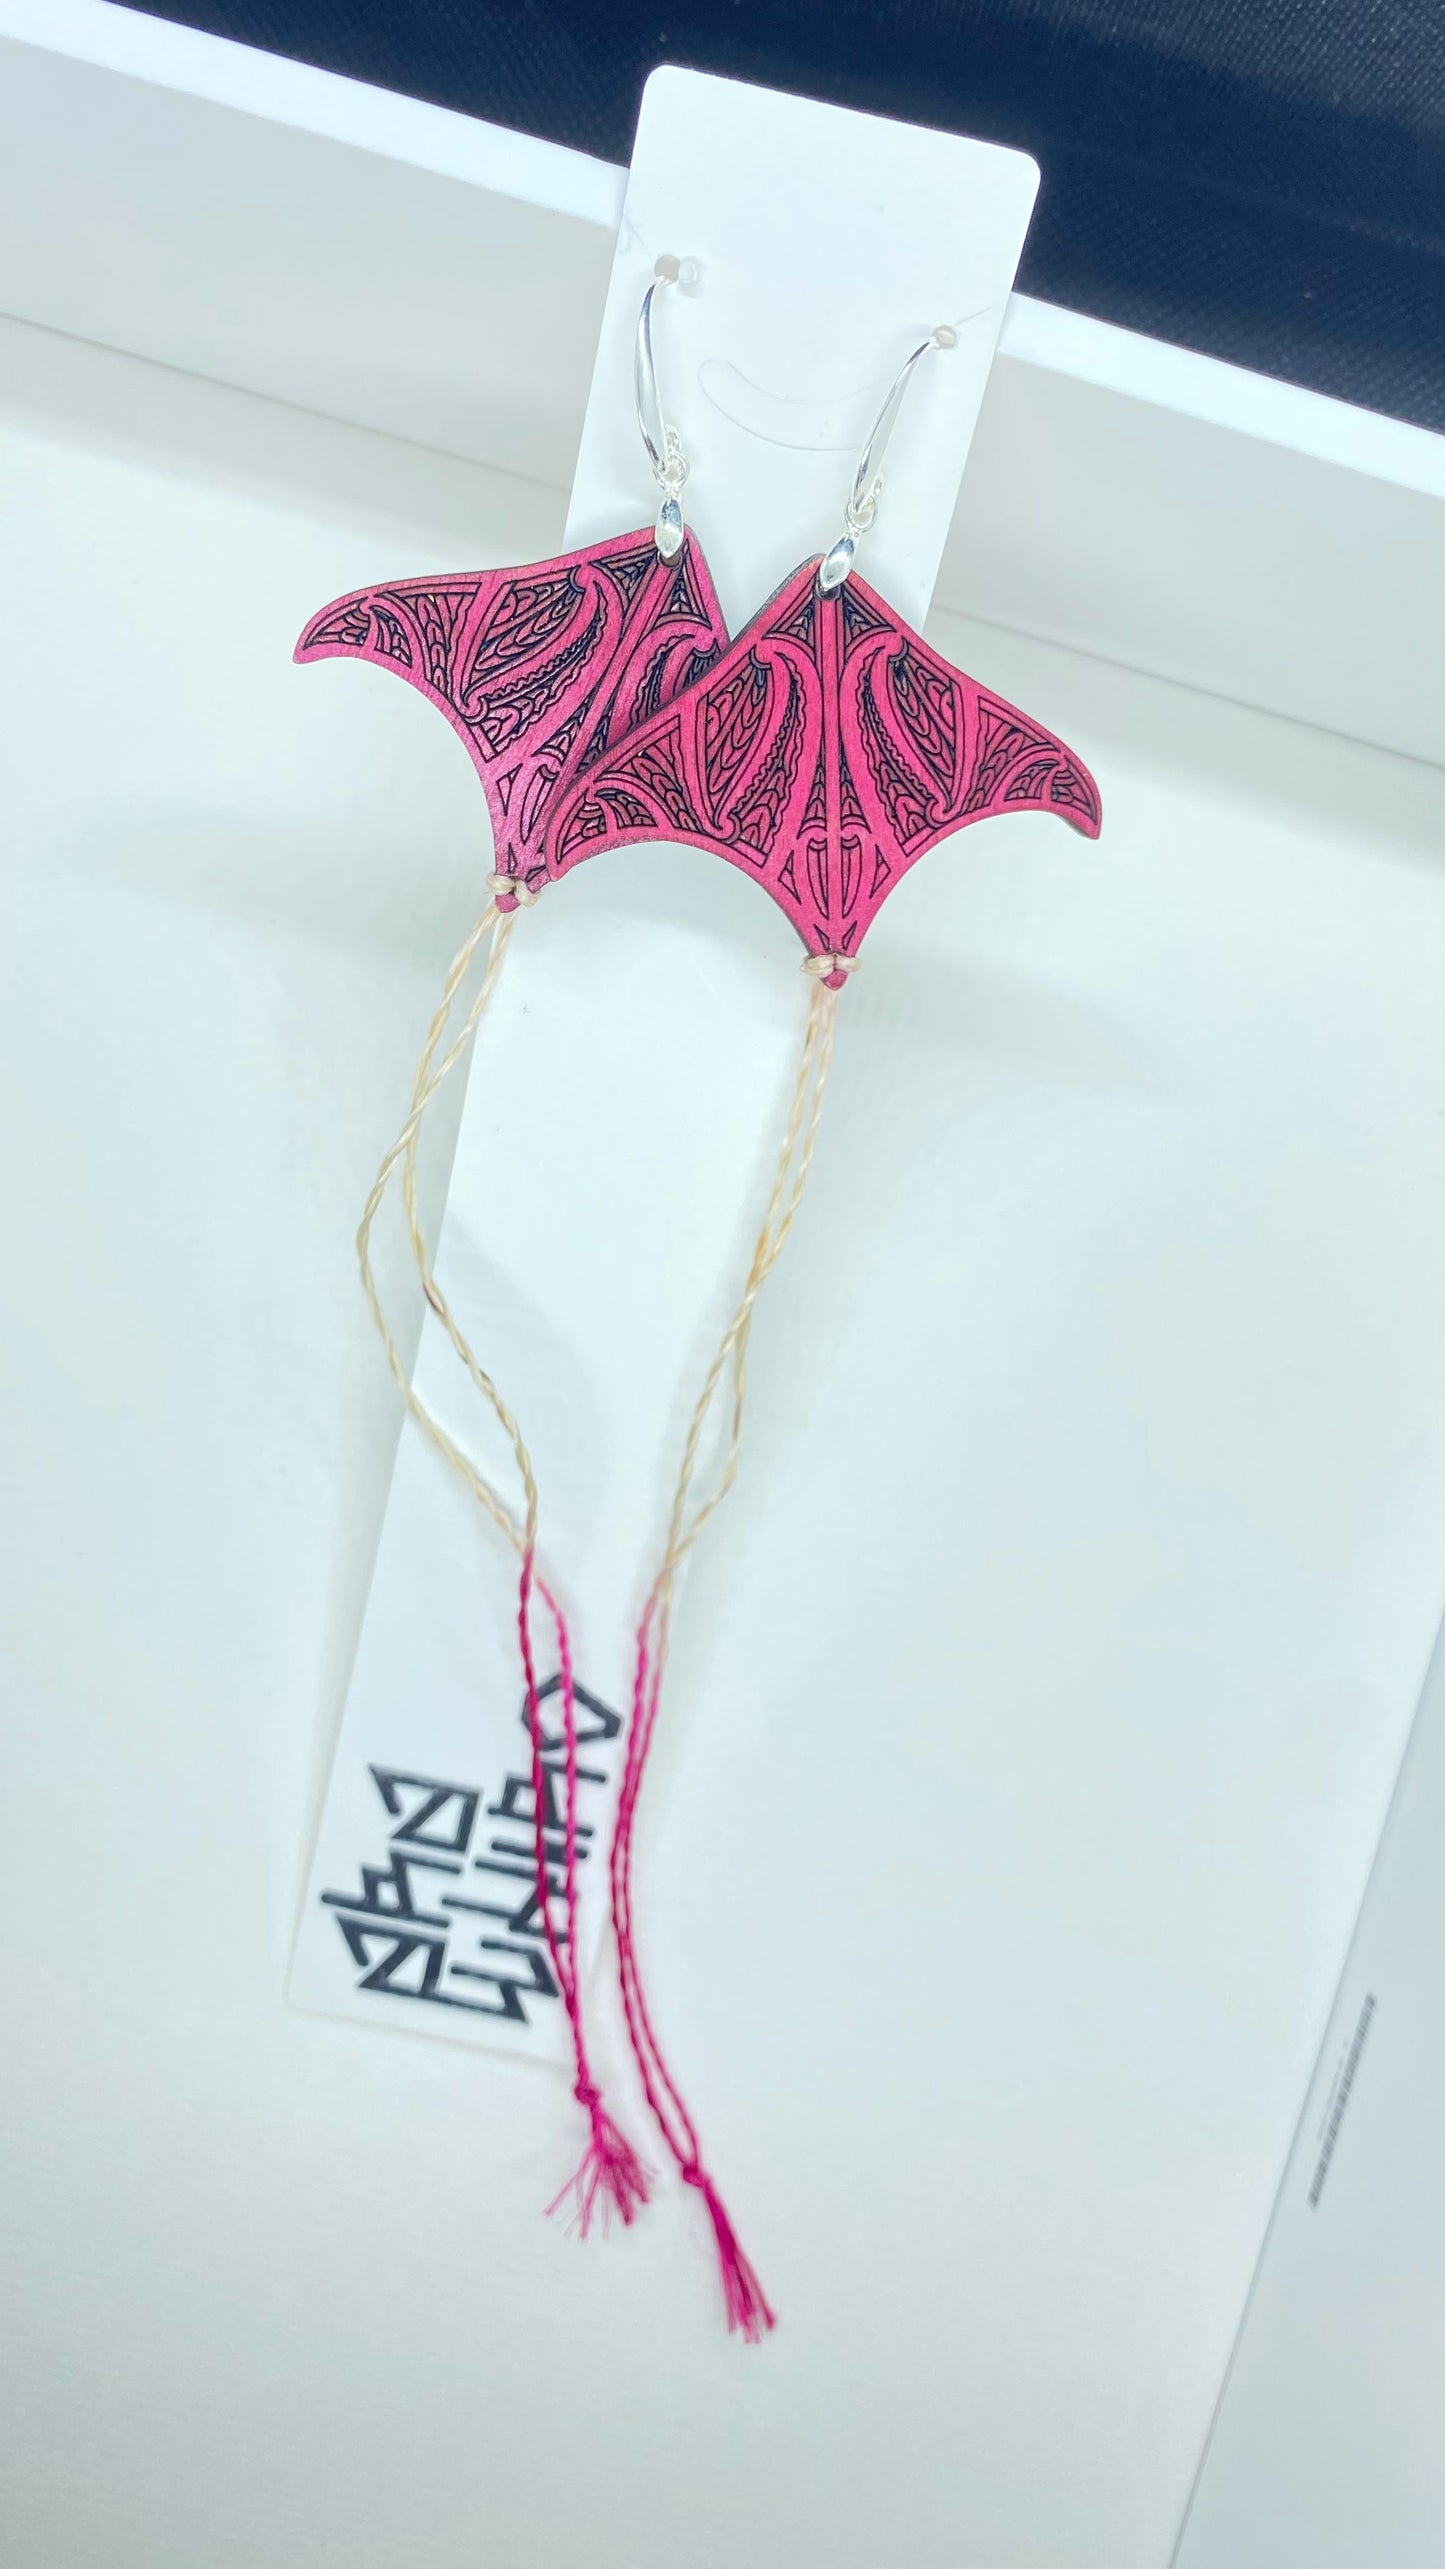 Whai are stingray shaped earrings hand finished in fuschia with muka aho lengths, the ends are dipoed in fuschia pink fading to natural. silver sterling .925 hooks attach at top.